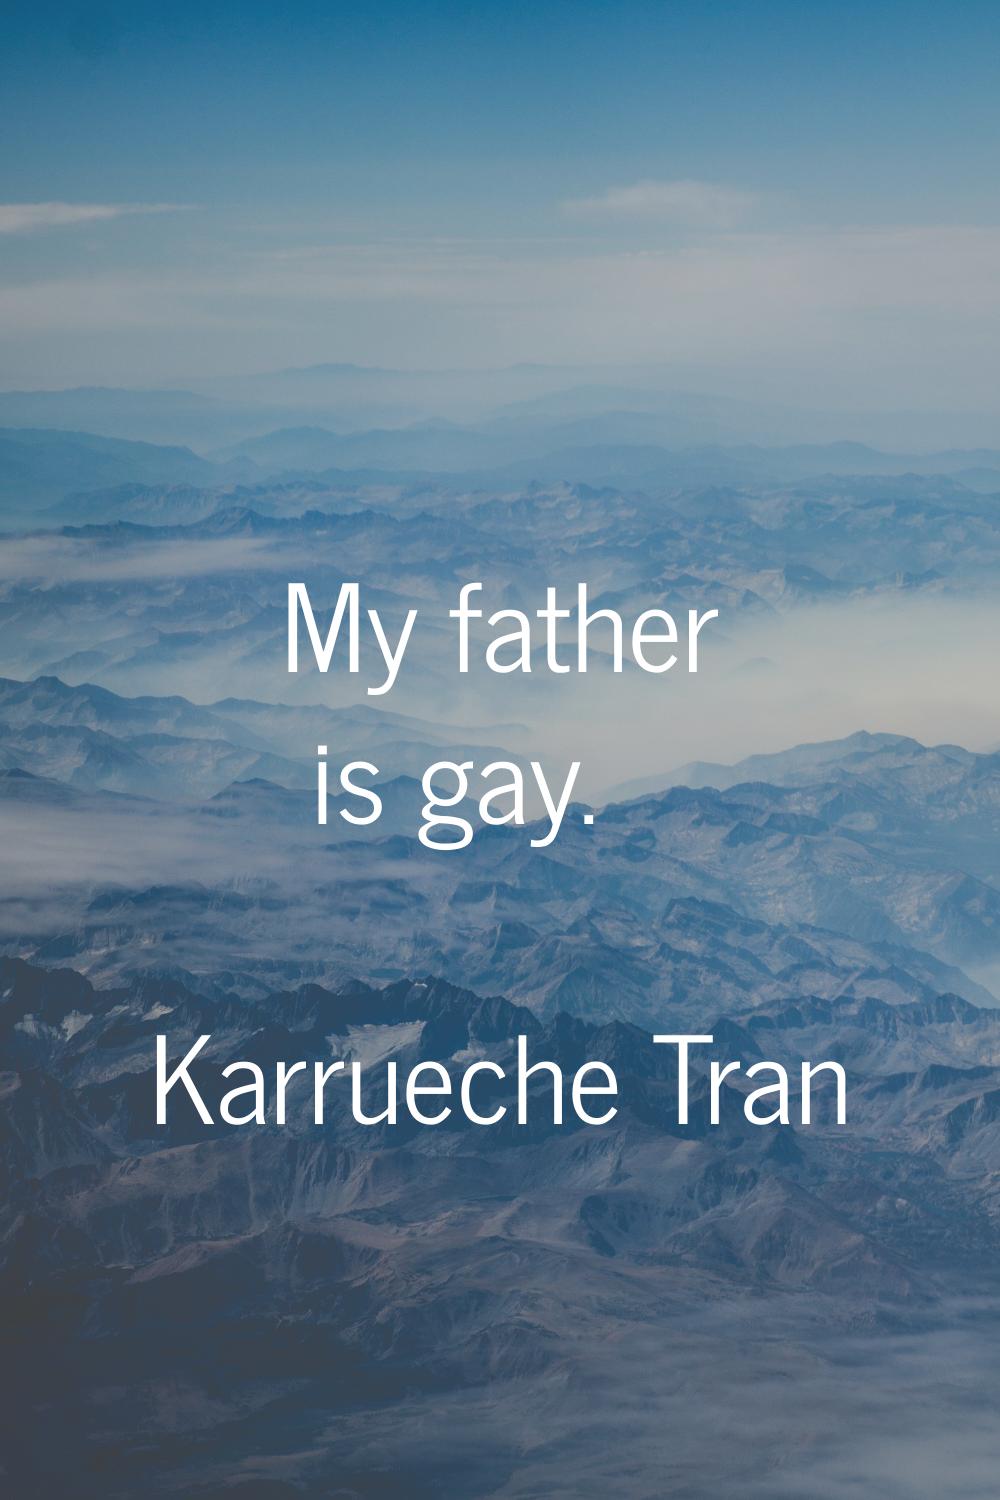 My father is gay.